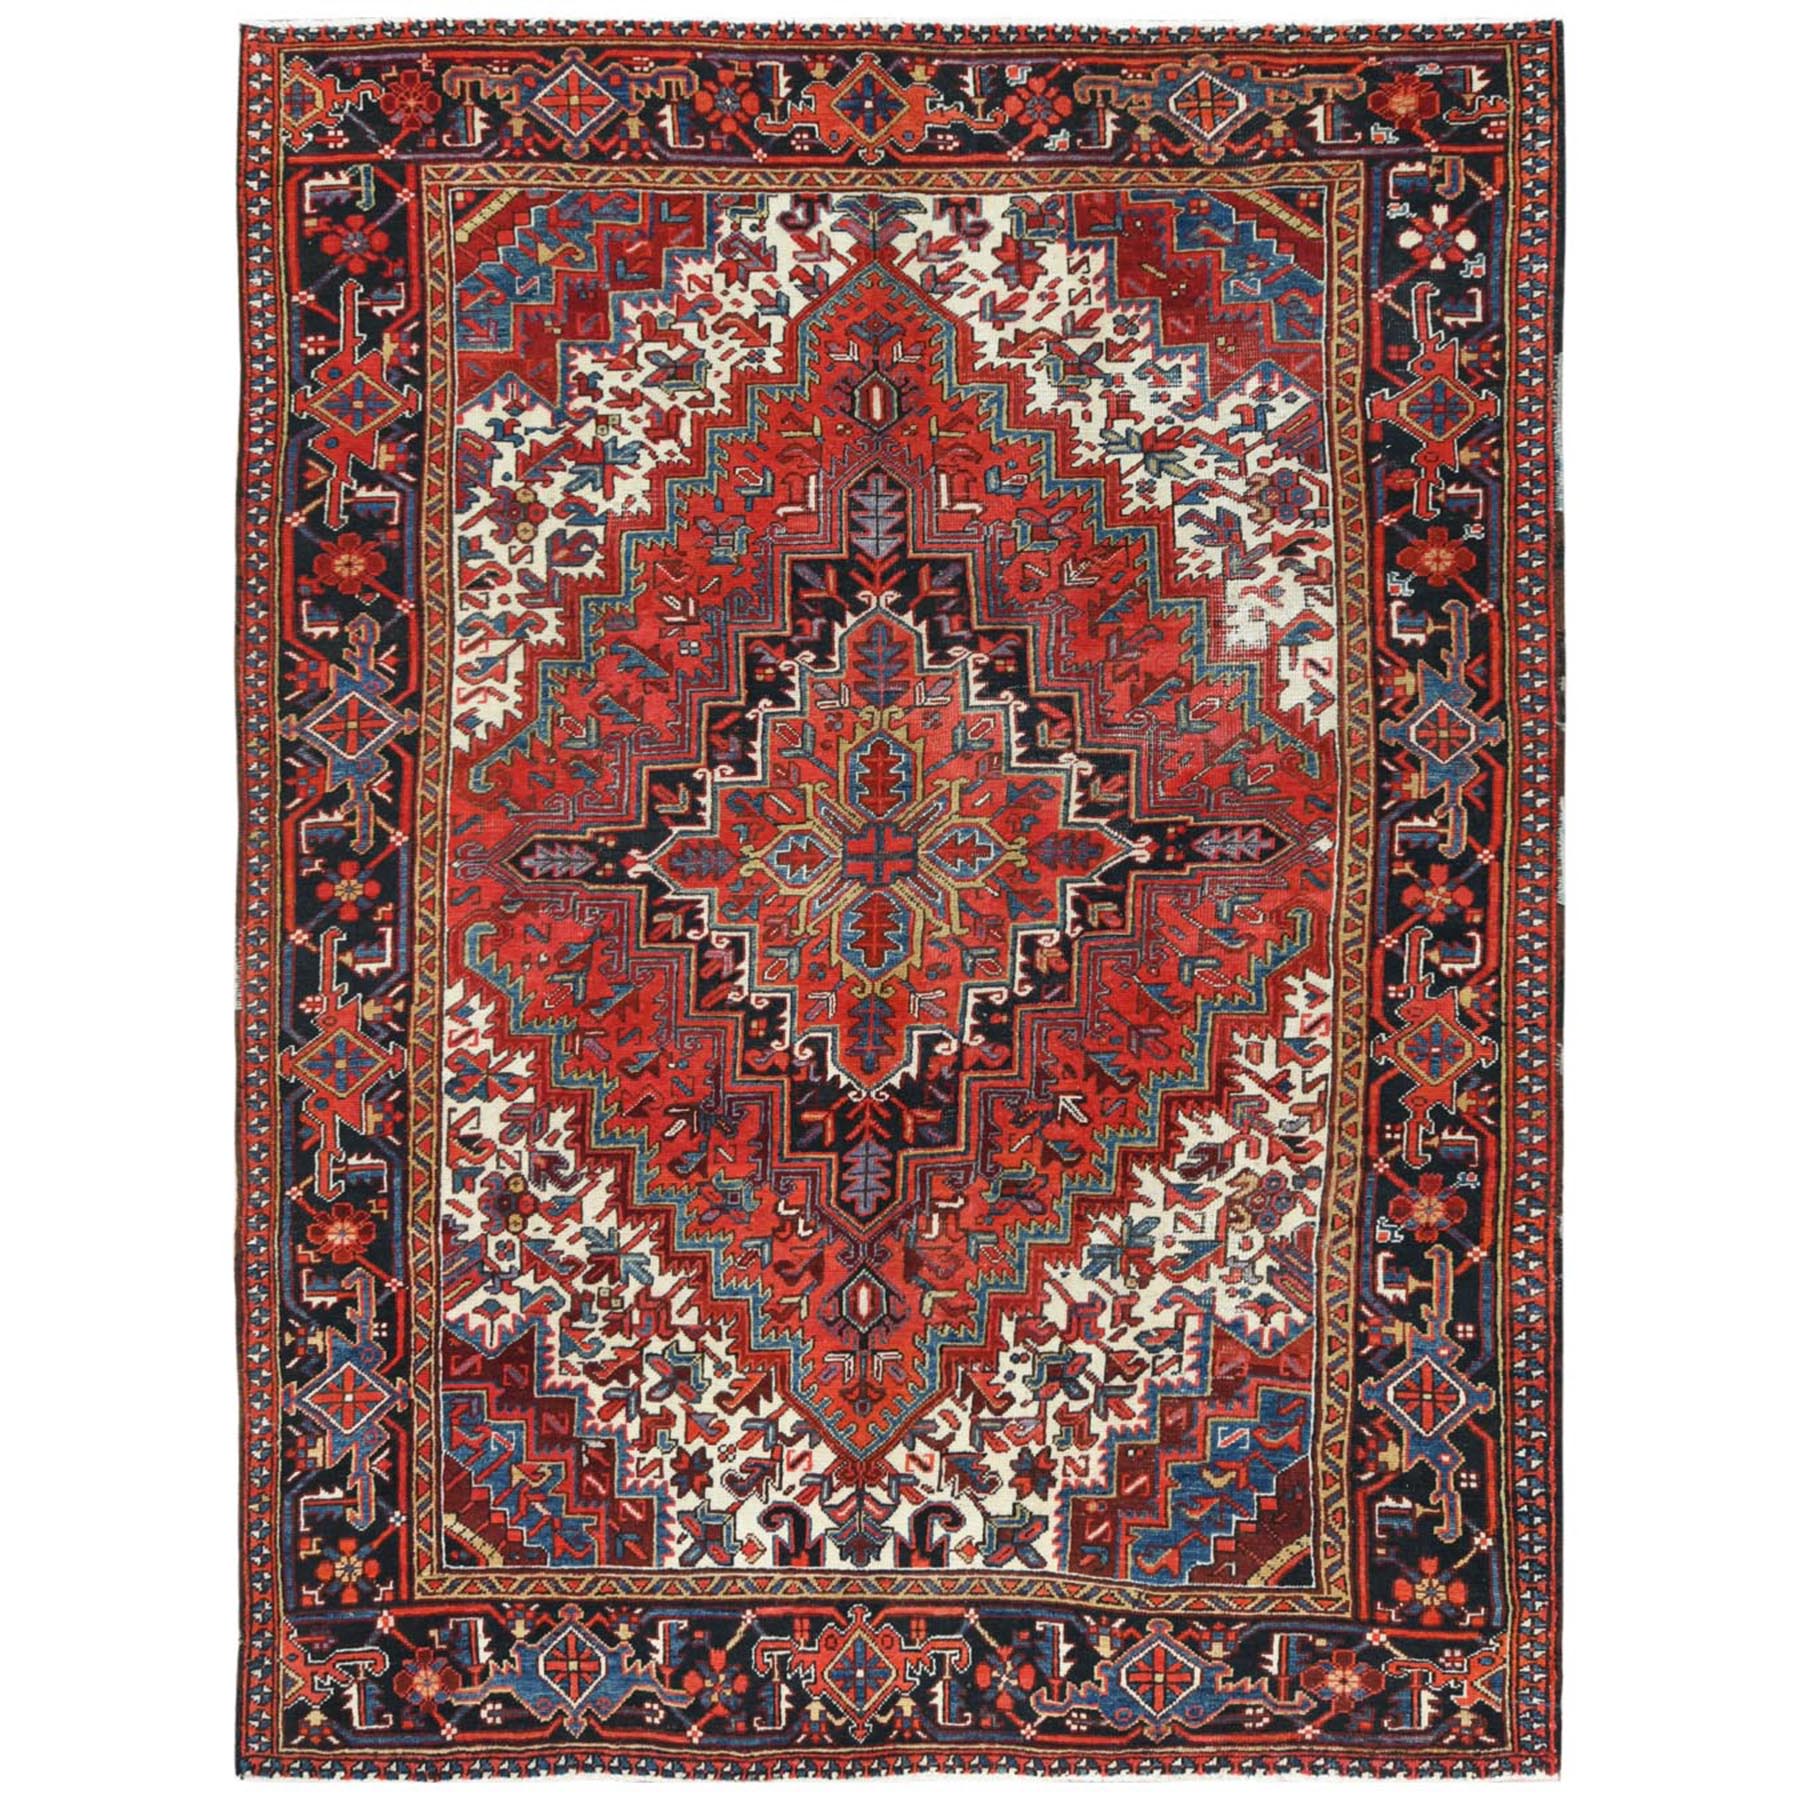  Wool Hand-Knotted Area Rug 7'4